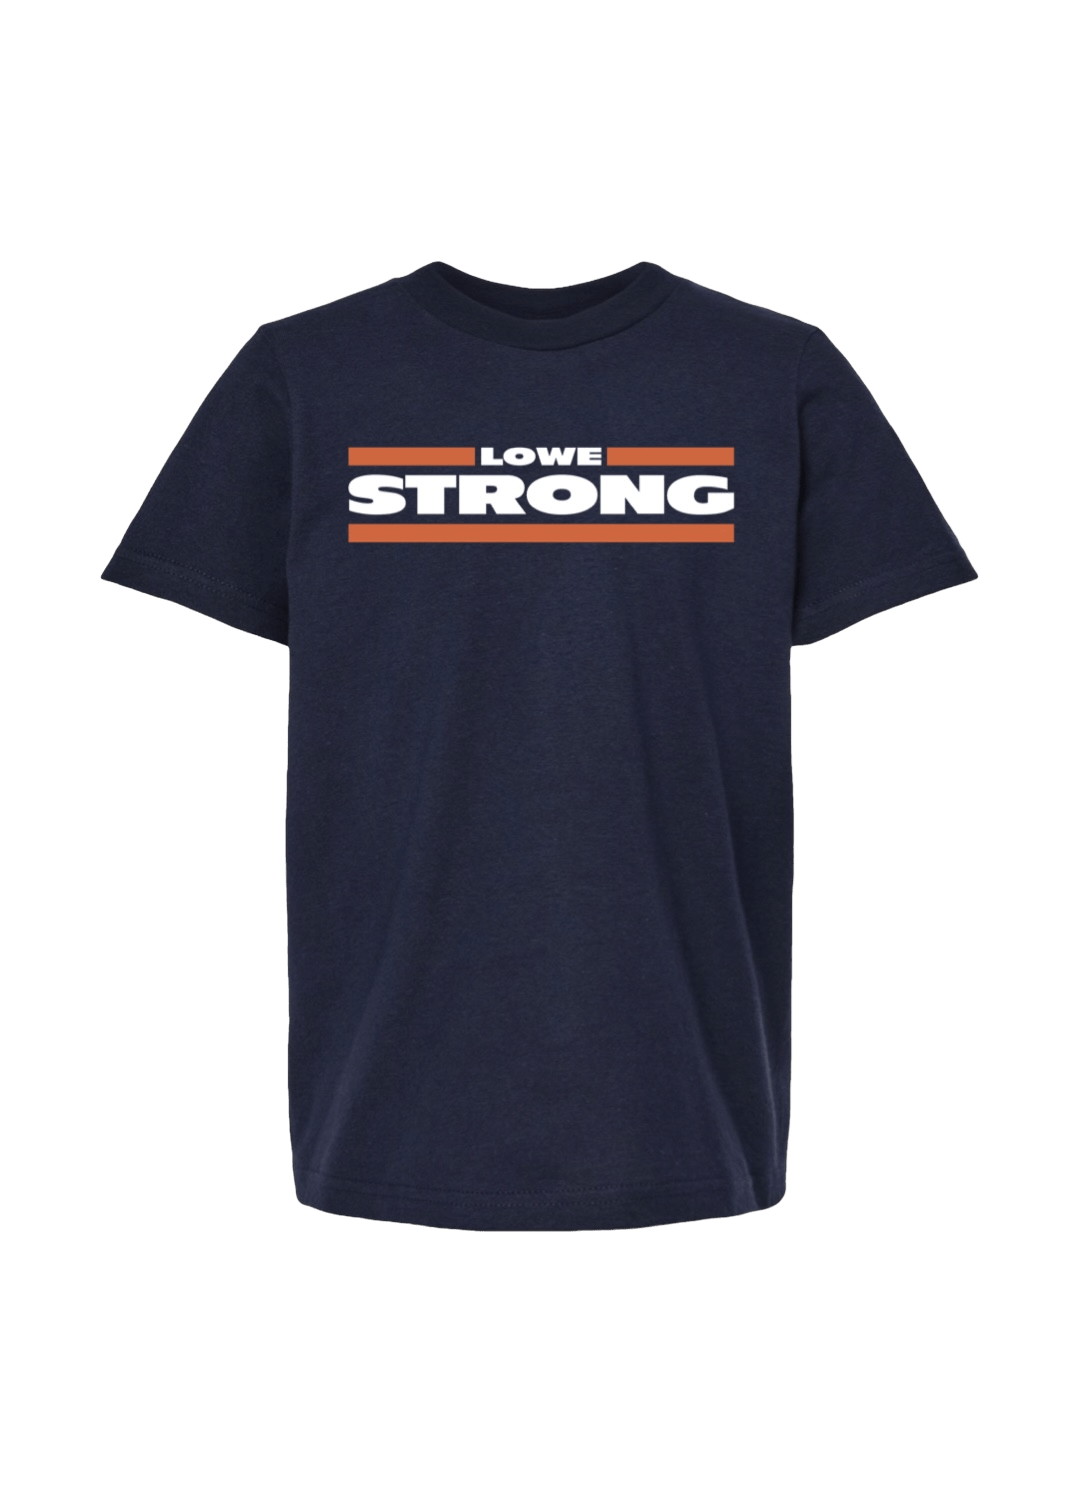 LOWE STRONG YOUTH (100% DONATED) - OBVIOUS SHIRTS